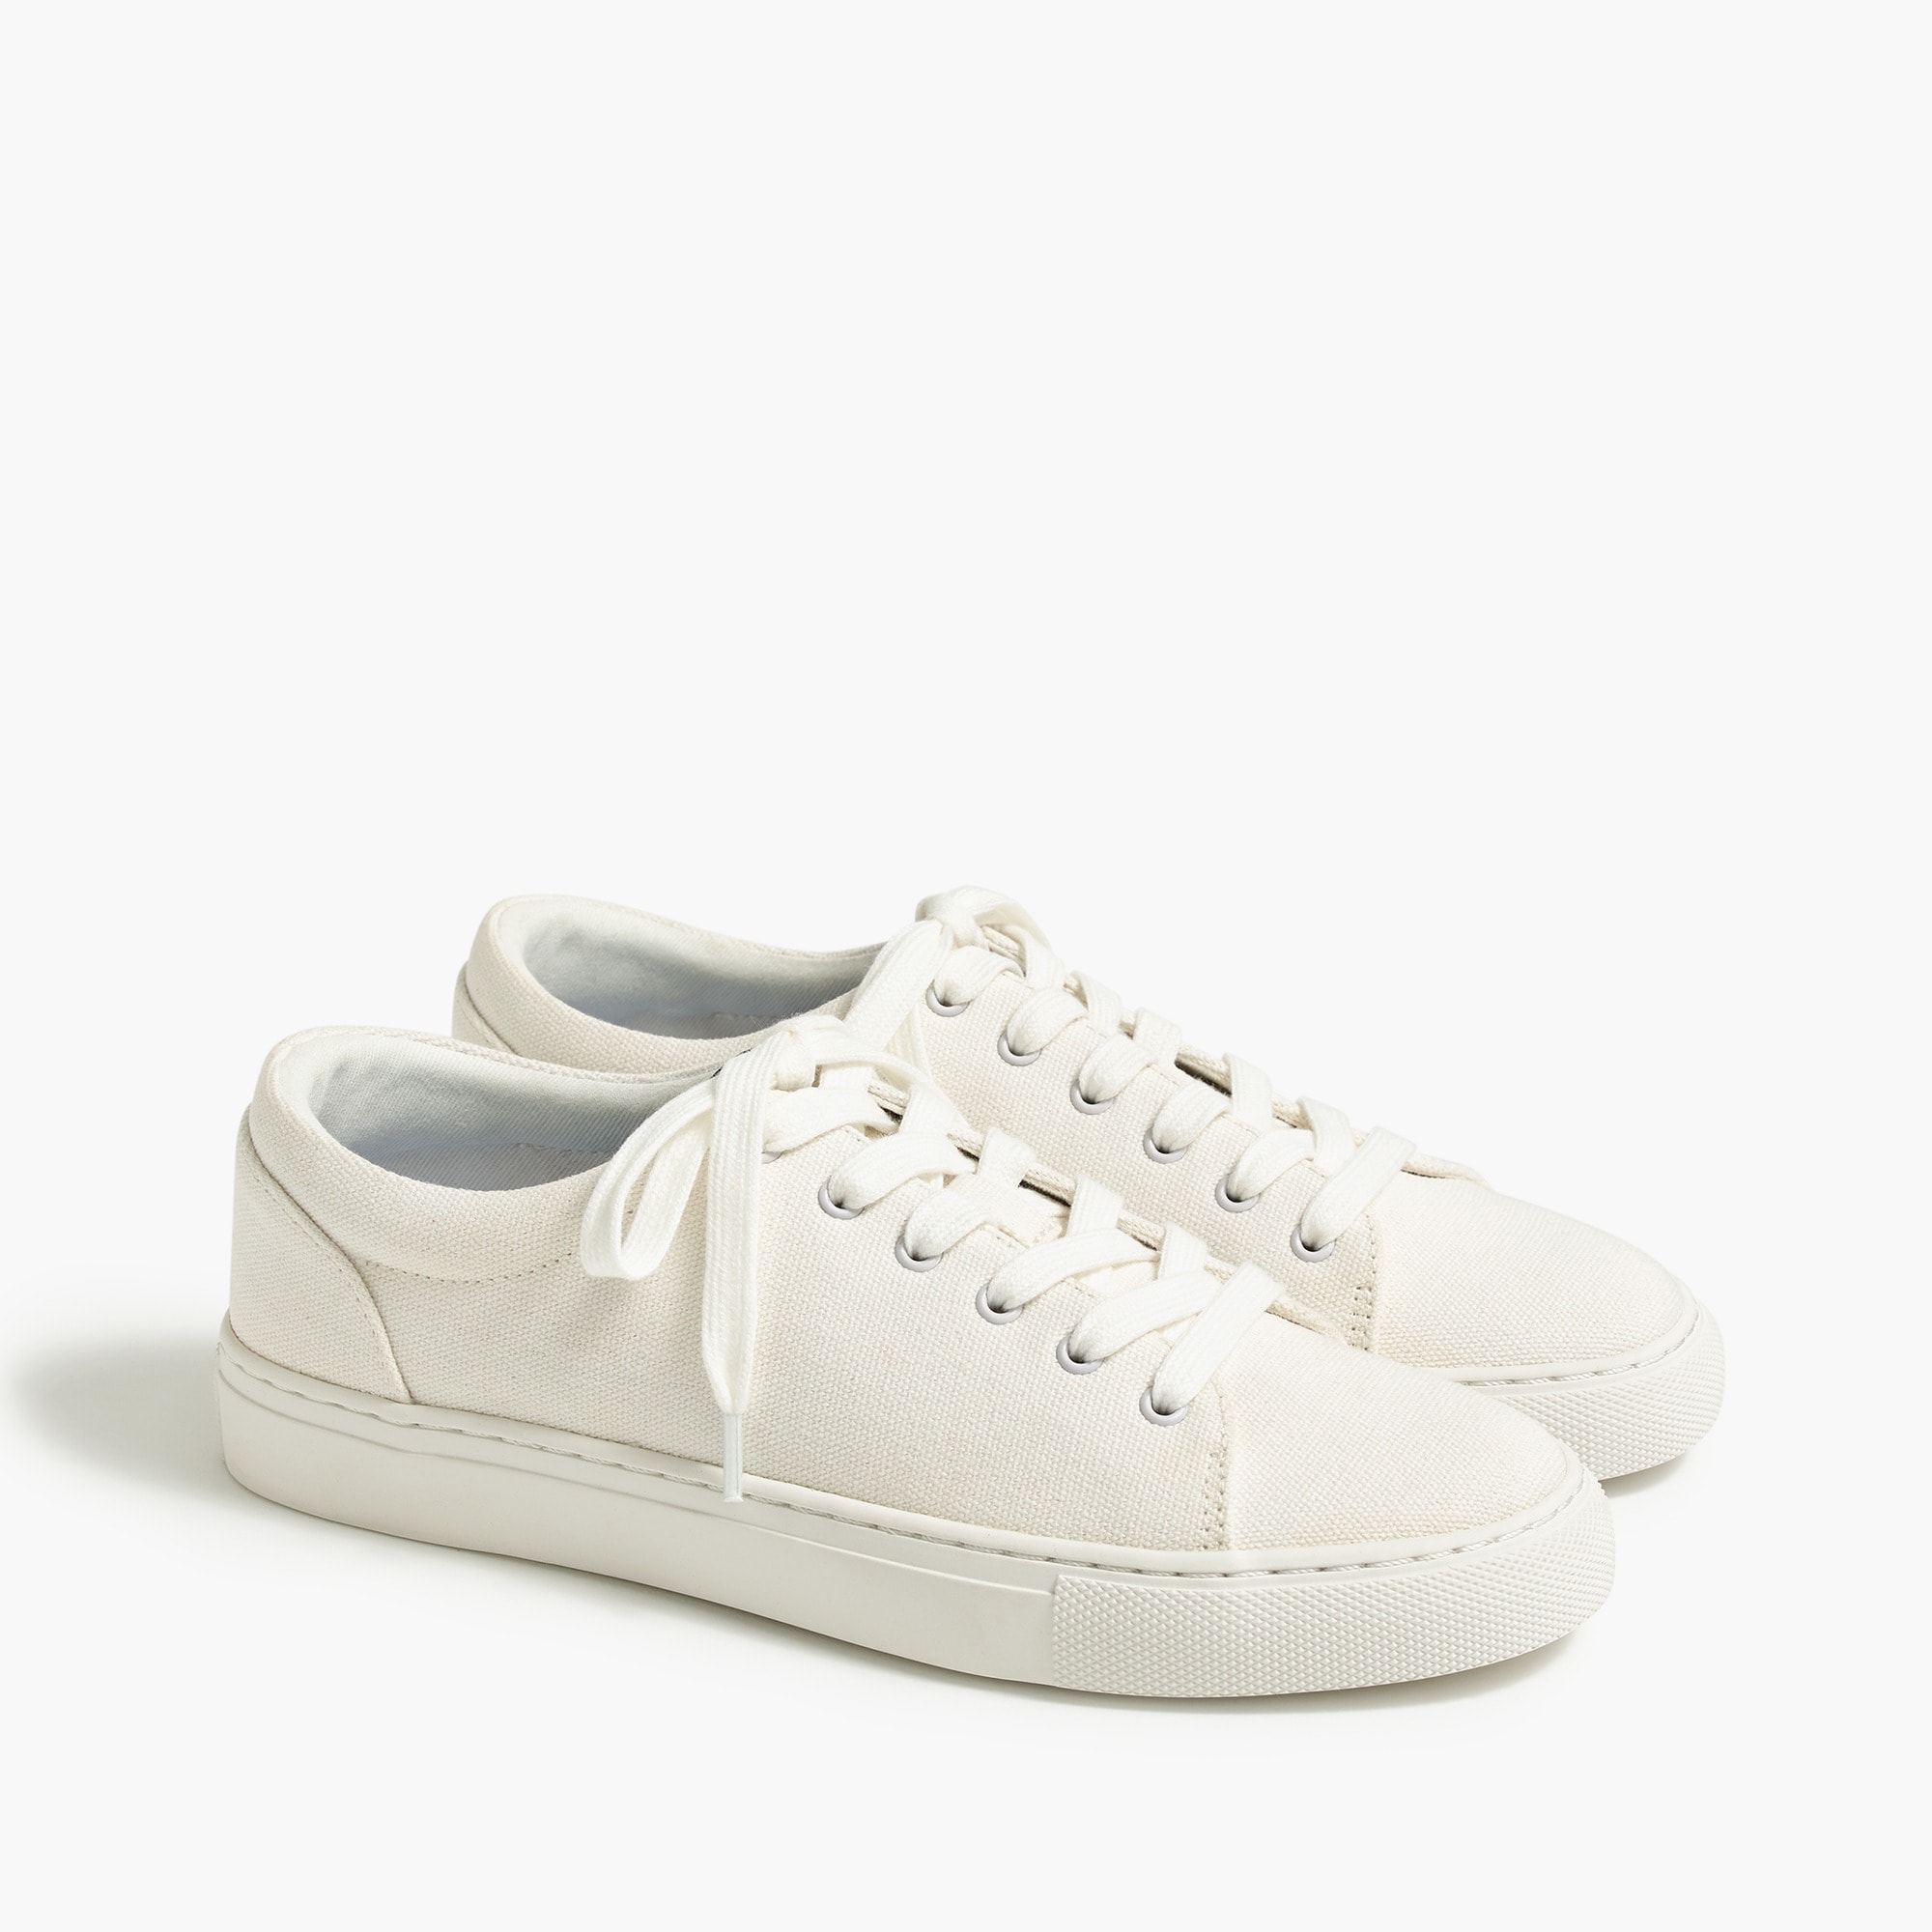 Factory: Road Trip Canvas Lace-up Sneakers For Women